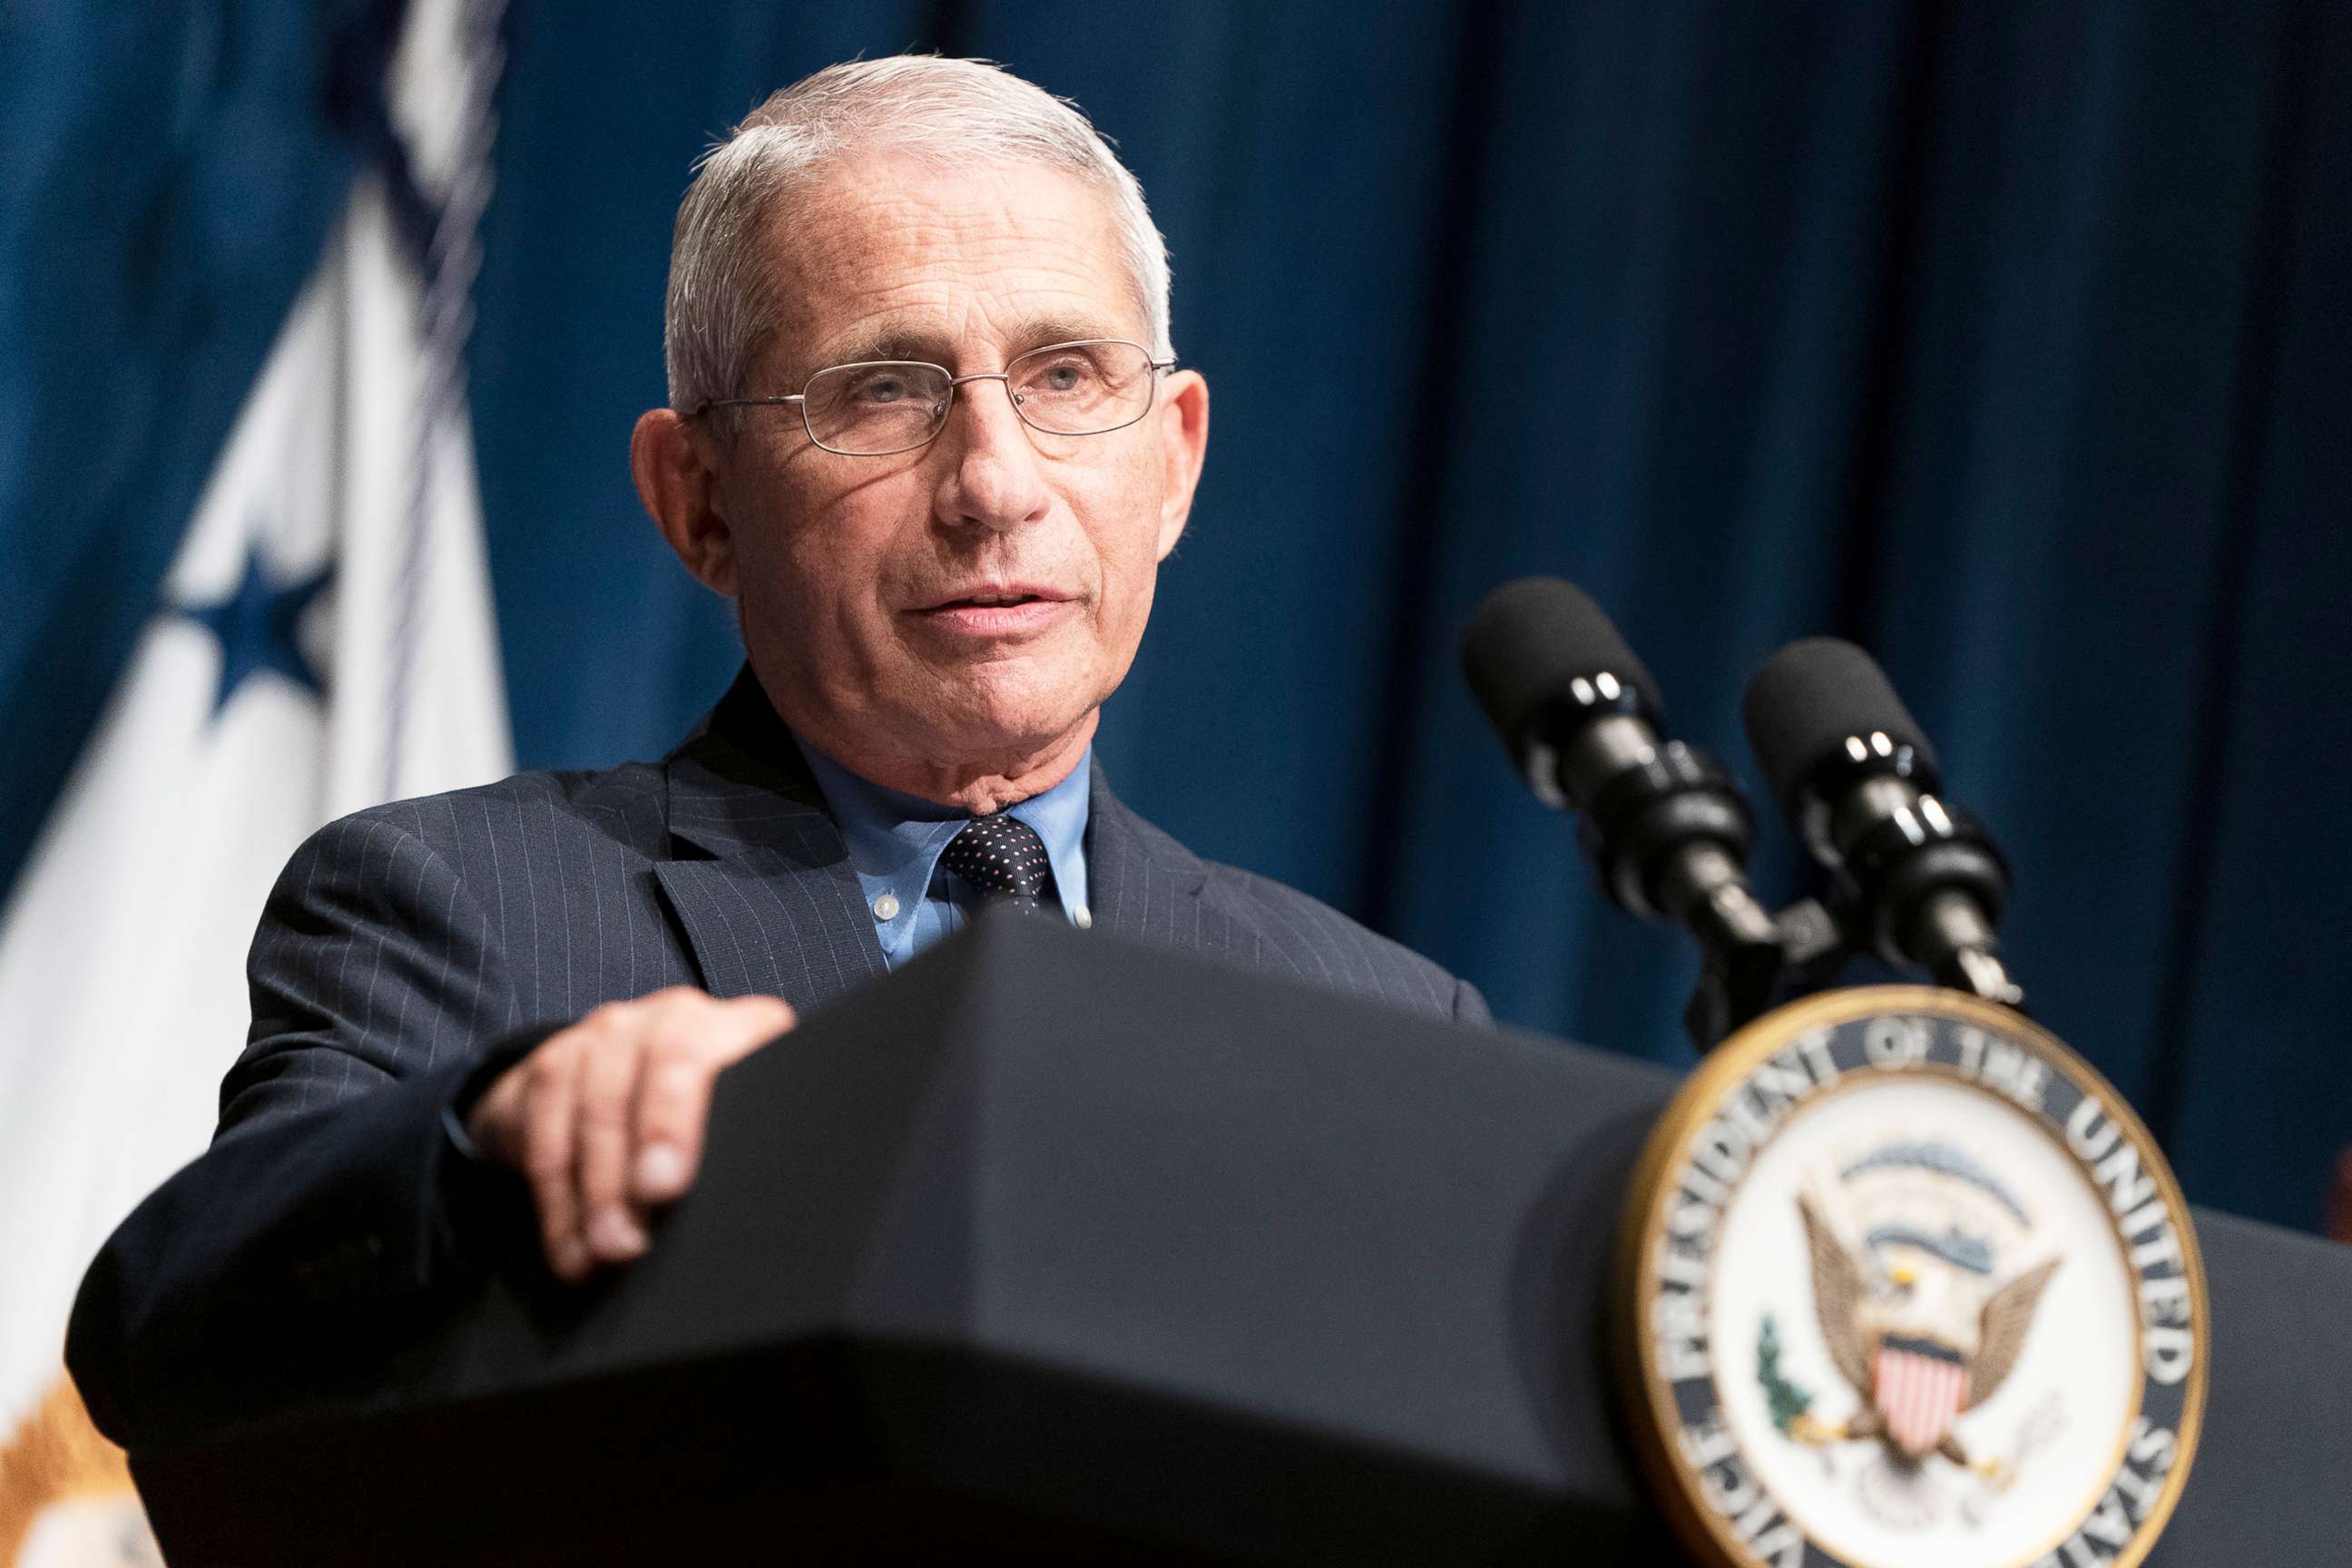 PHOTO: Director of the National Institute of Allergy and Infectious Diseases Anthony Fauci speaks after a White House Coronavirus Task Force briefing in Washington, June 26, 2021.